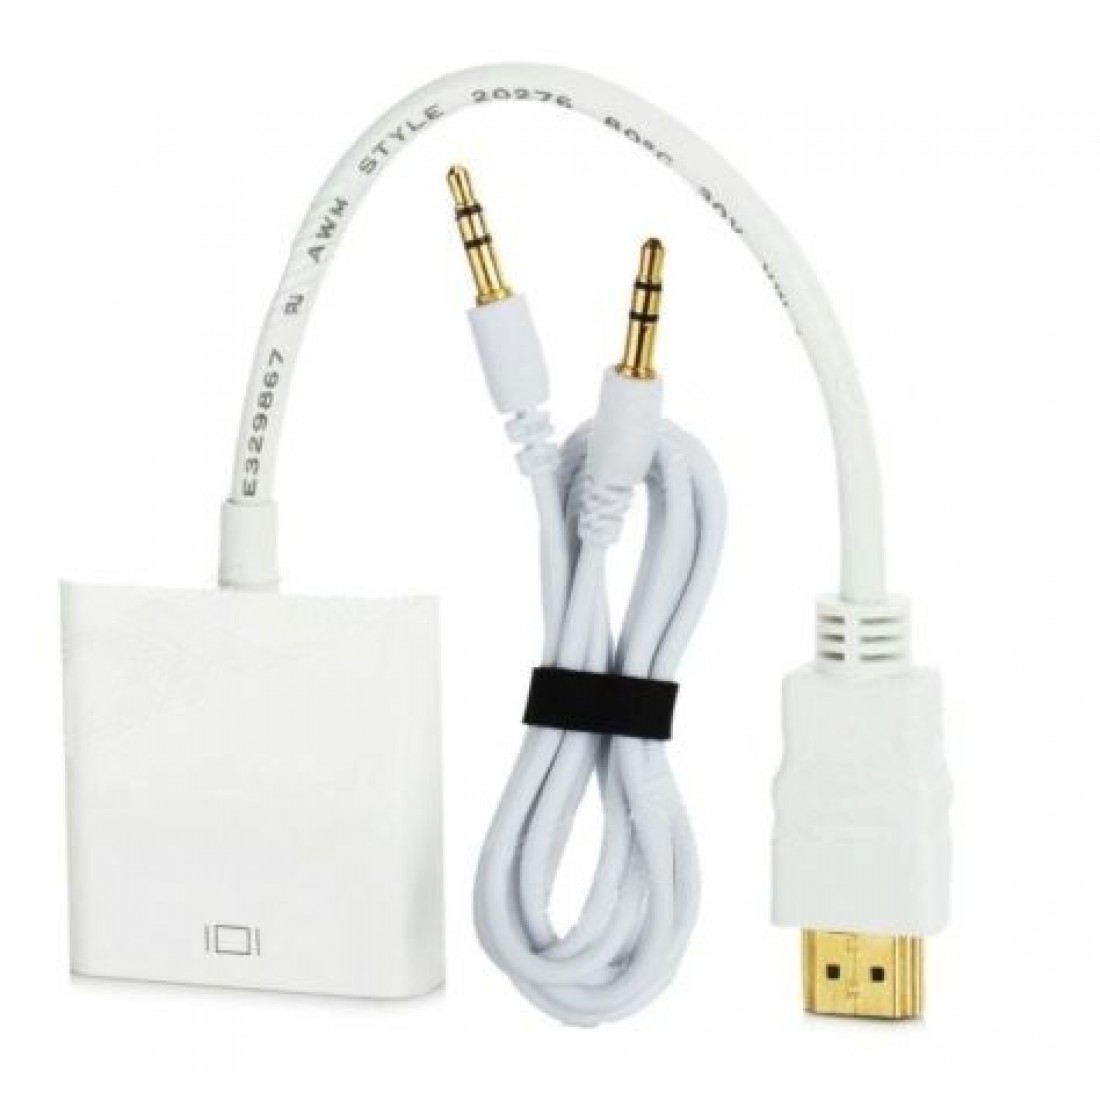 HDMI MALE TO VGA FEMALE WITH SOUND ADAPTER